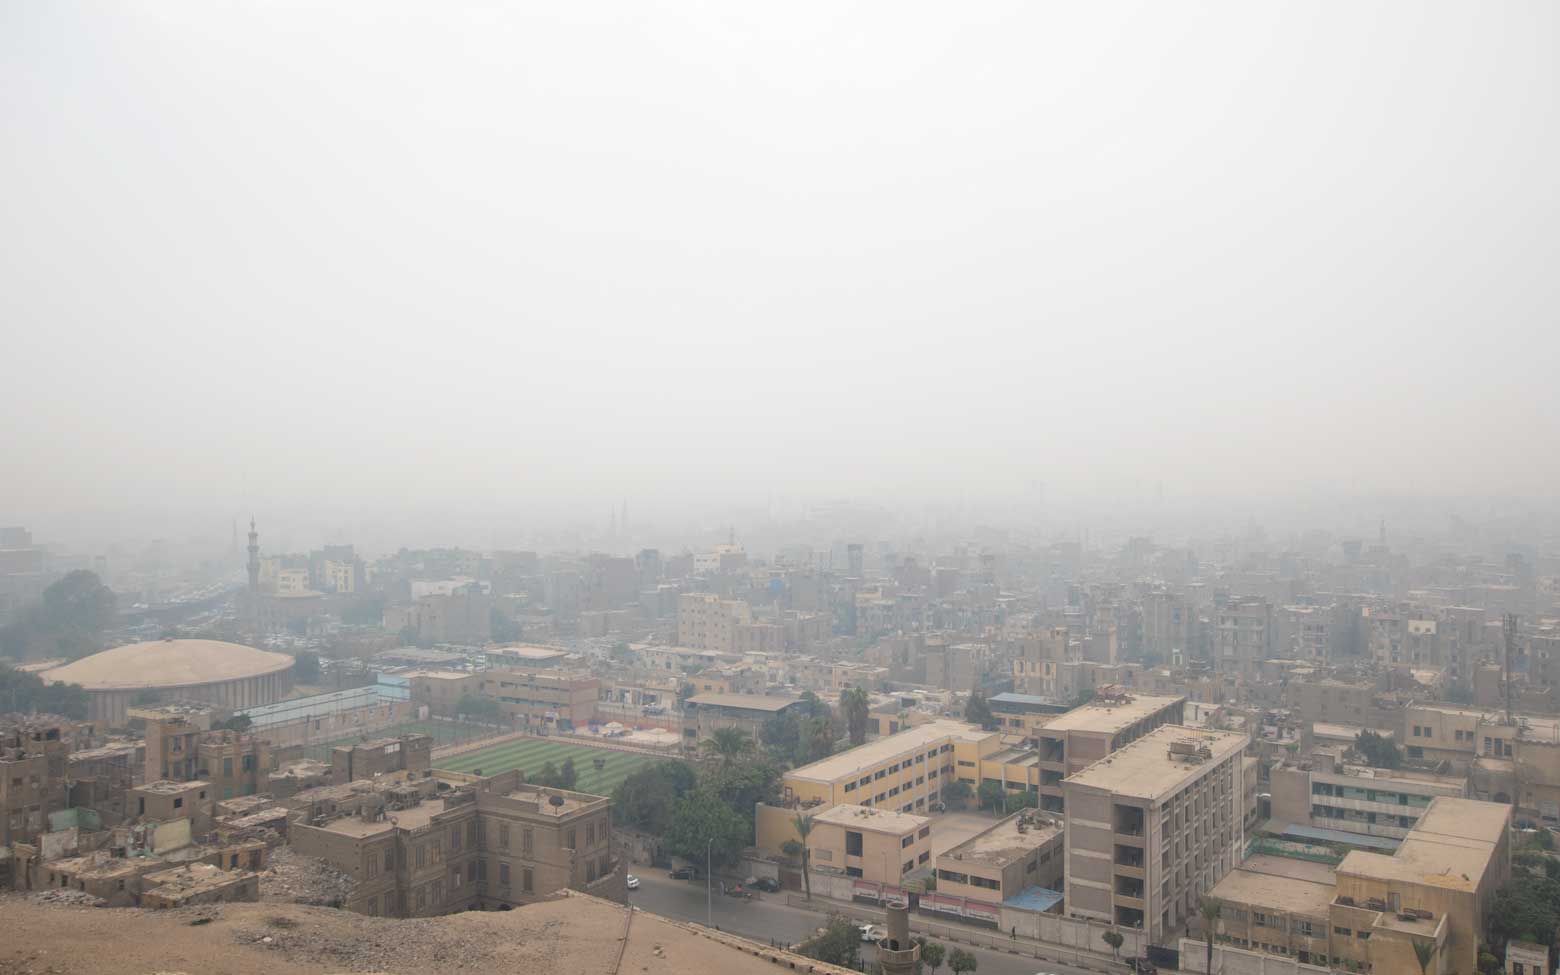 smog in cairo,egypt. View from the citadel